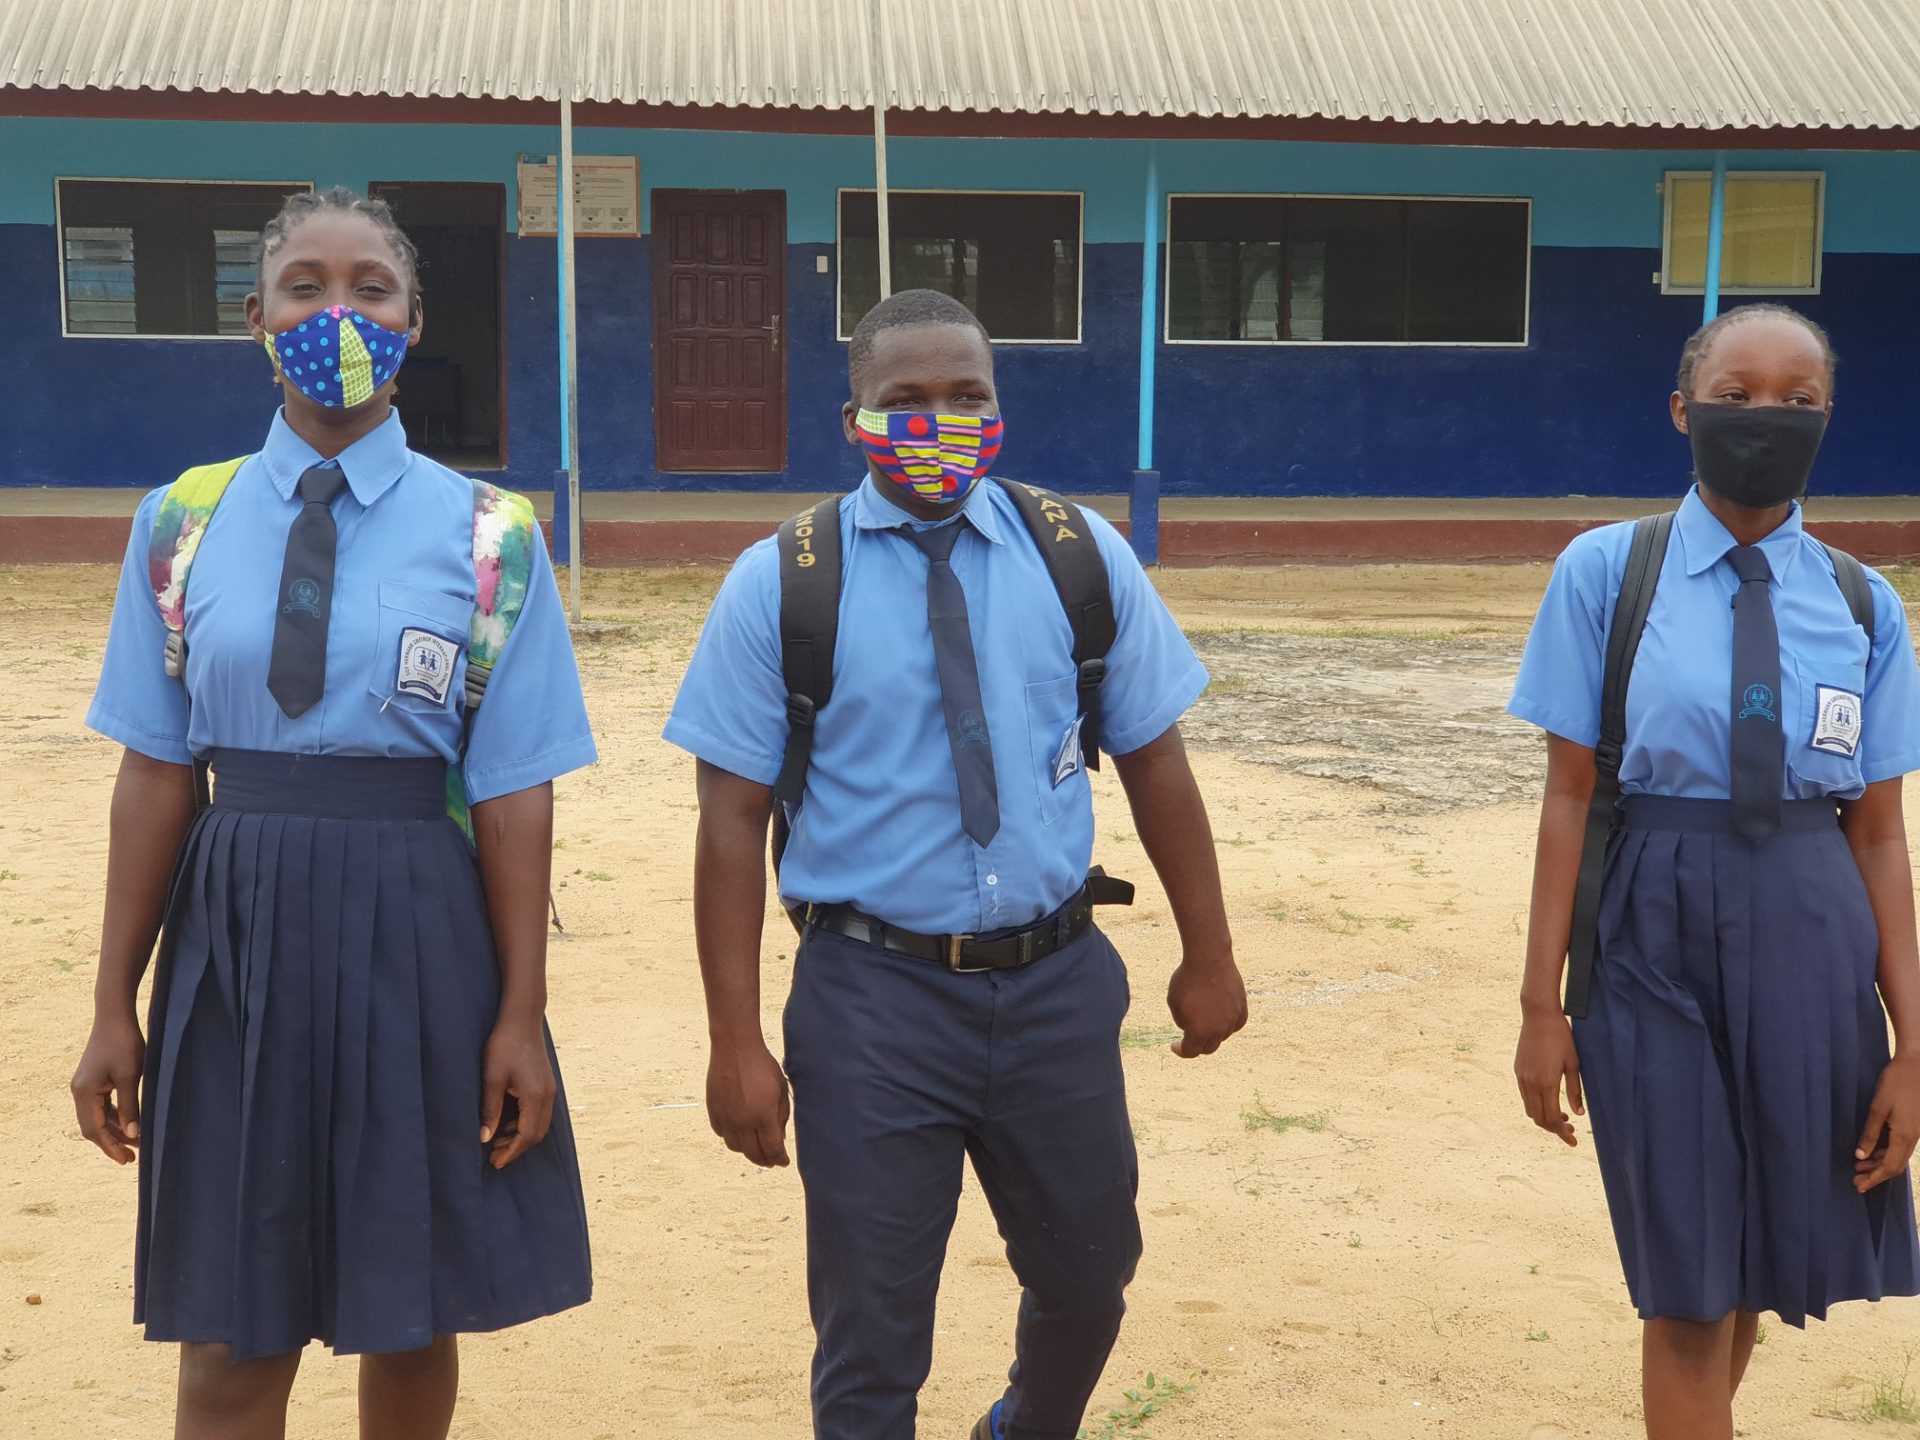 As 12th Graders return to school after 4 months of school closure due to Coronavirus, SOS Children’s Villages Liberia tightens COVID-19 preventive measures